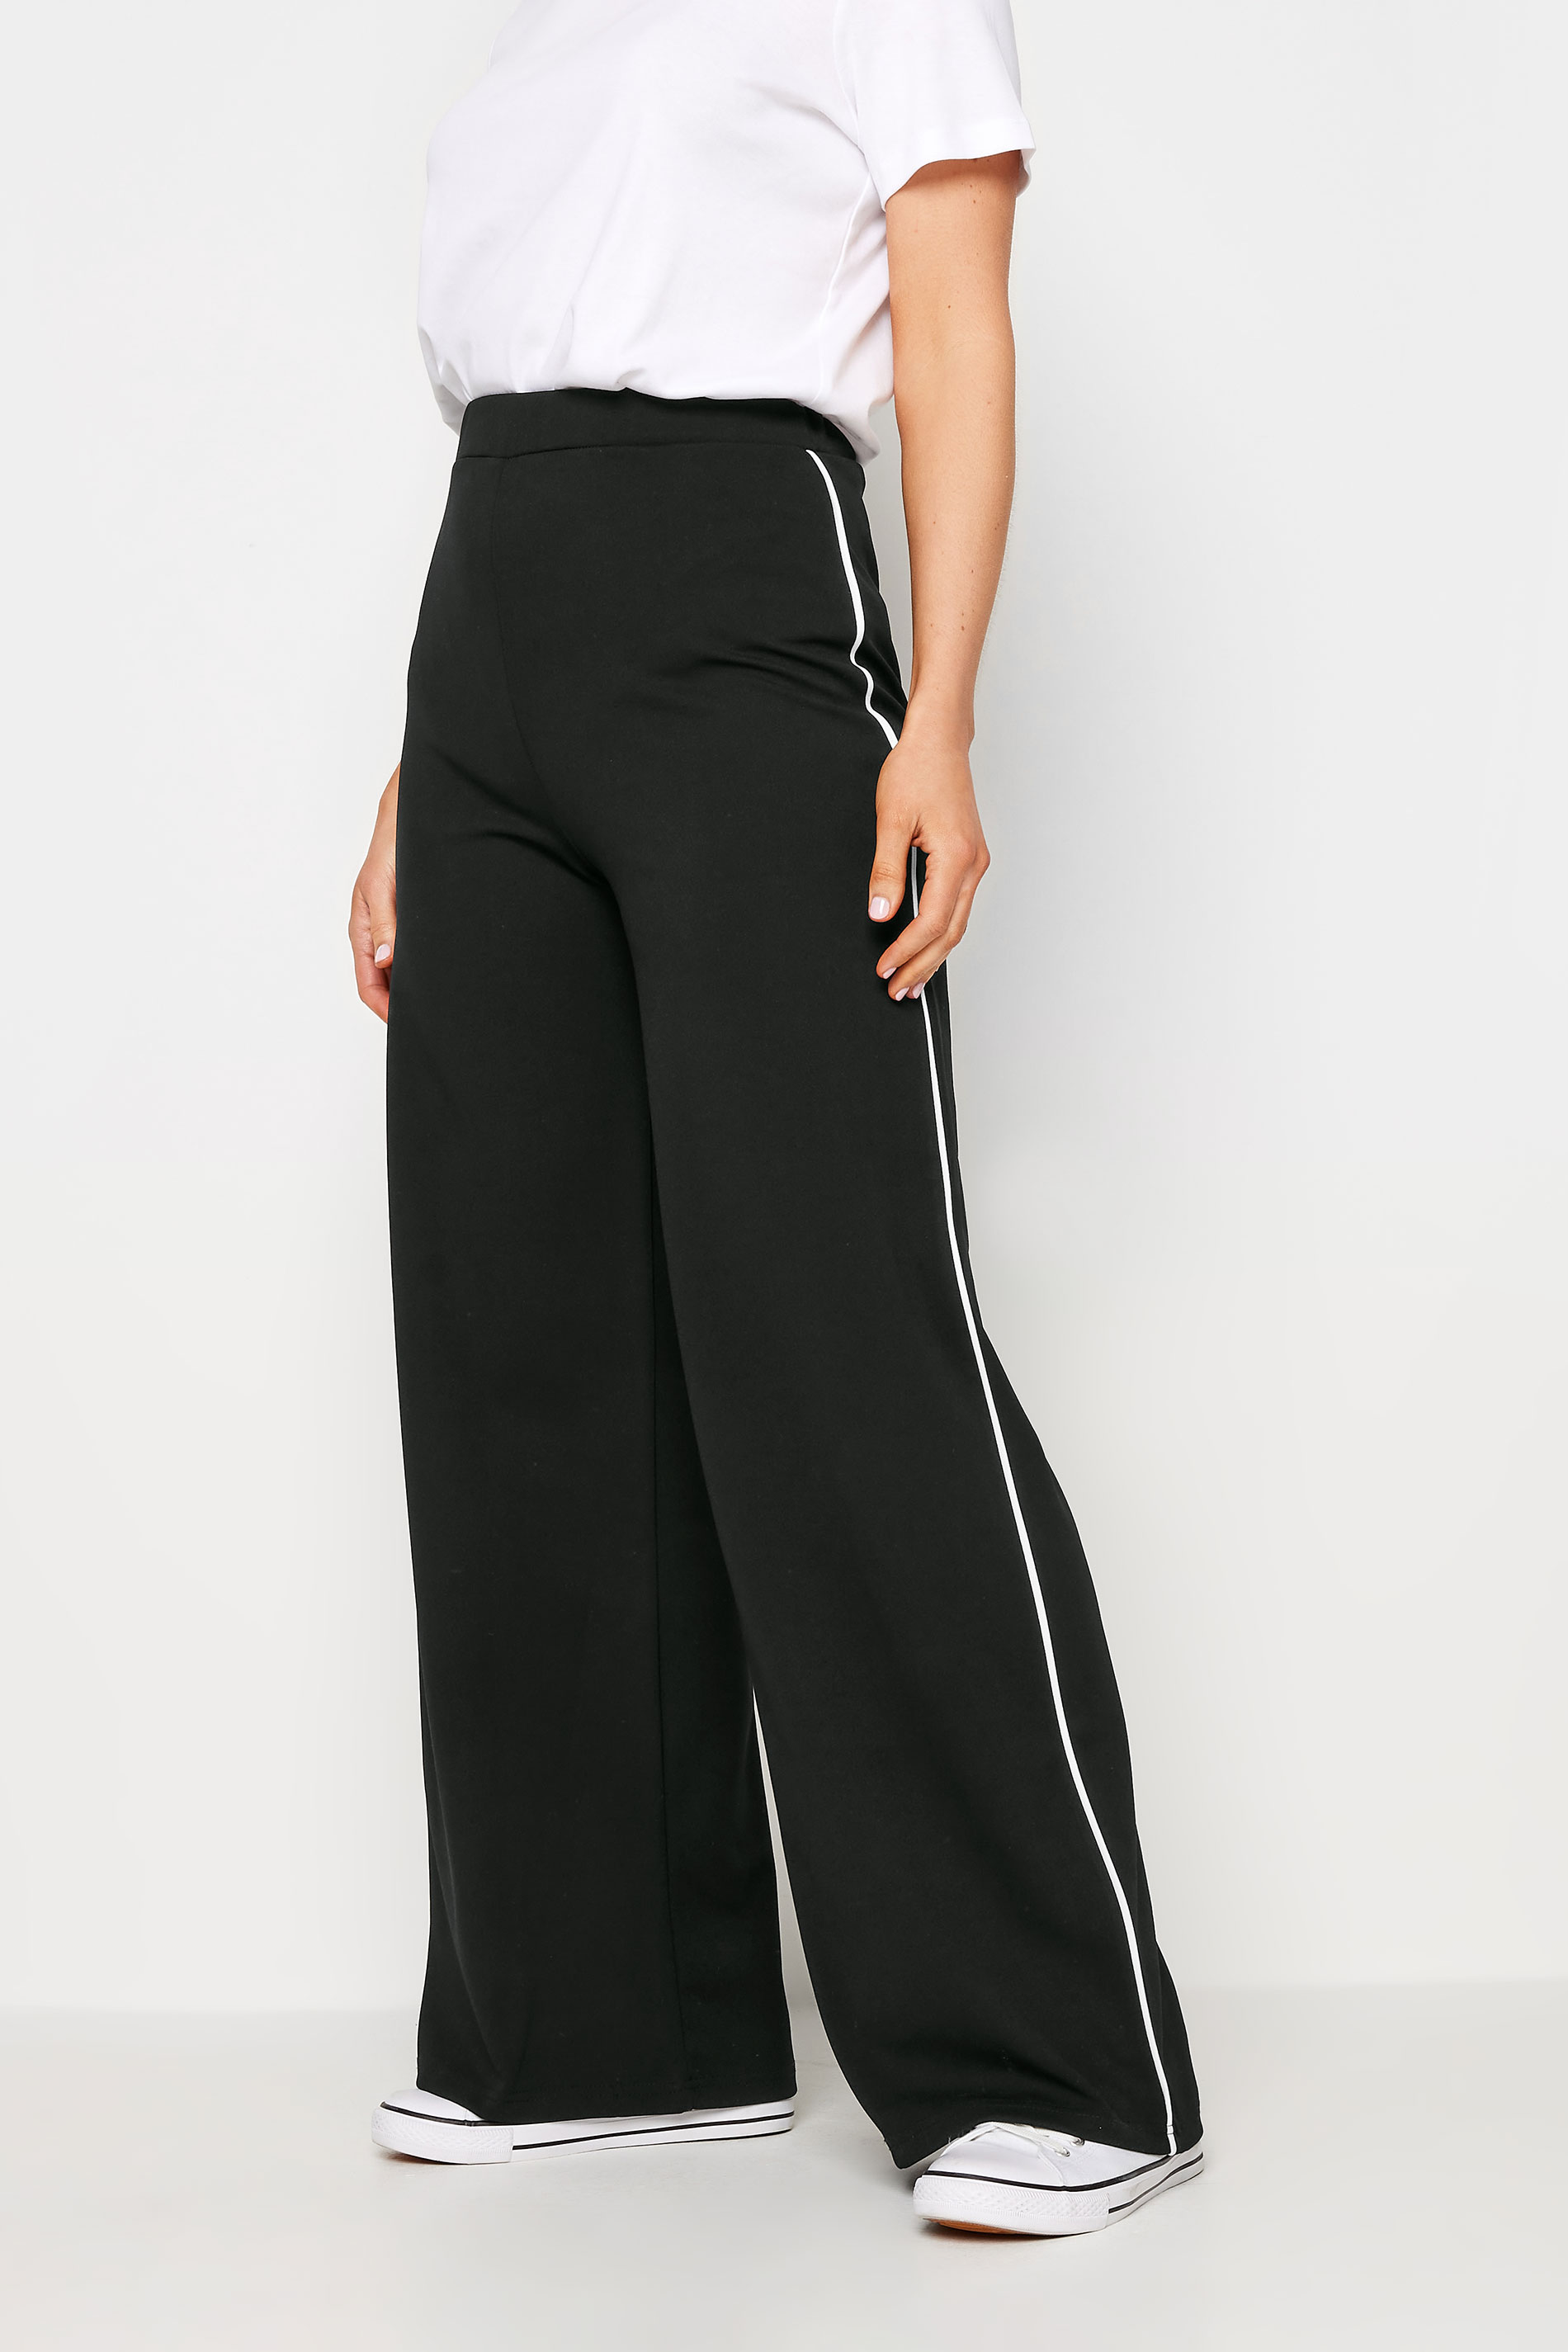 LTS Tall Womens Black & White Side Pipe Detail Wide Leg Trousers | Long Tall Sally 2